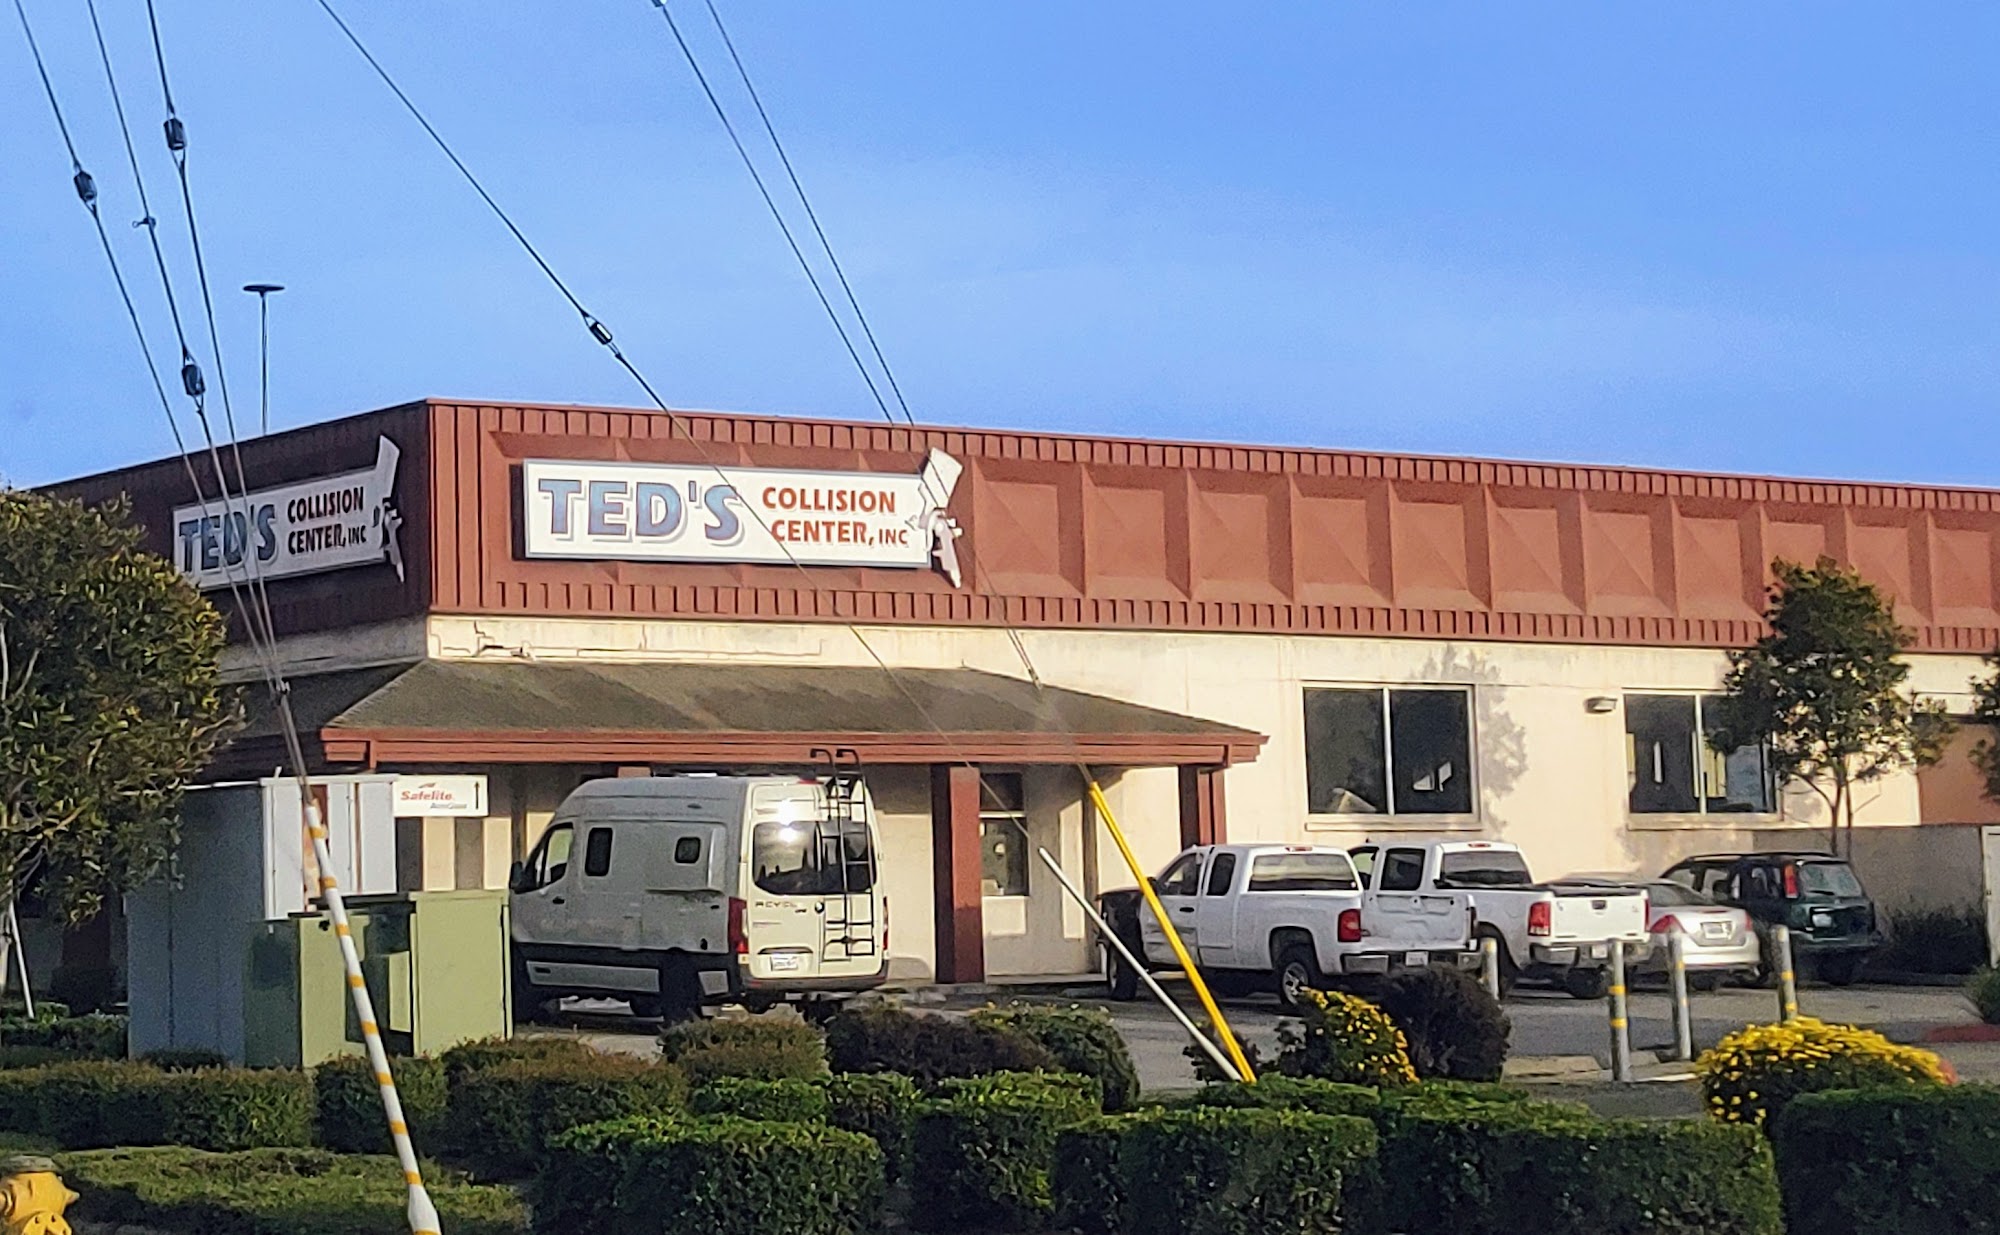 Ted's Collision Center